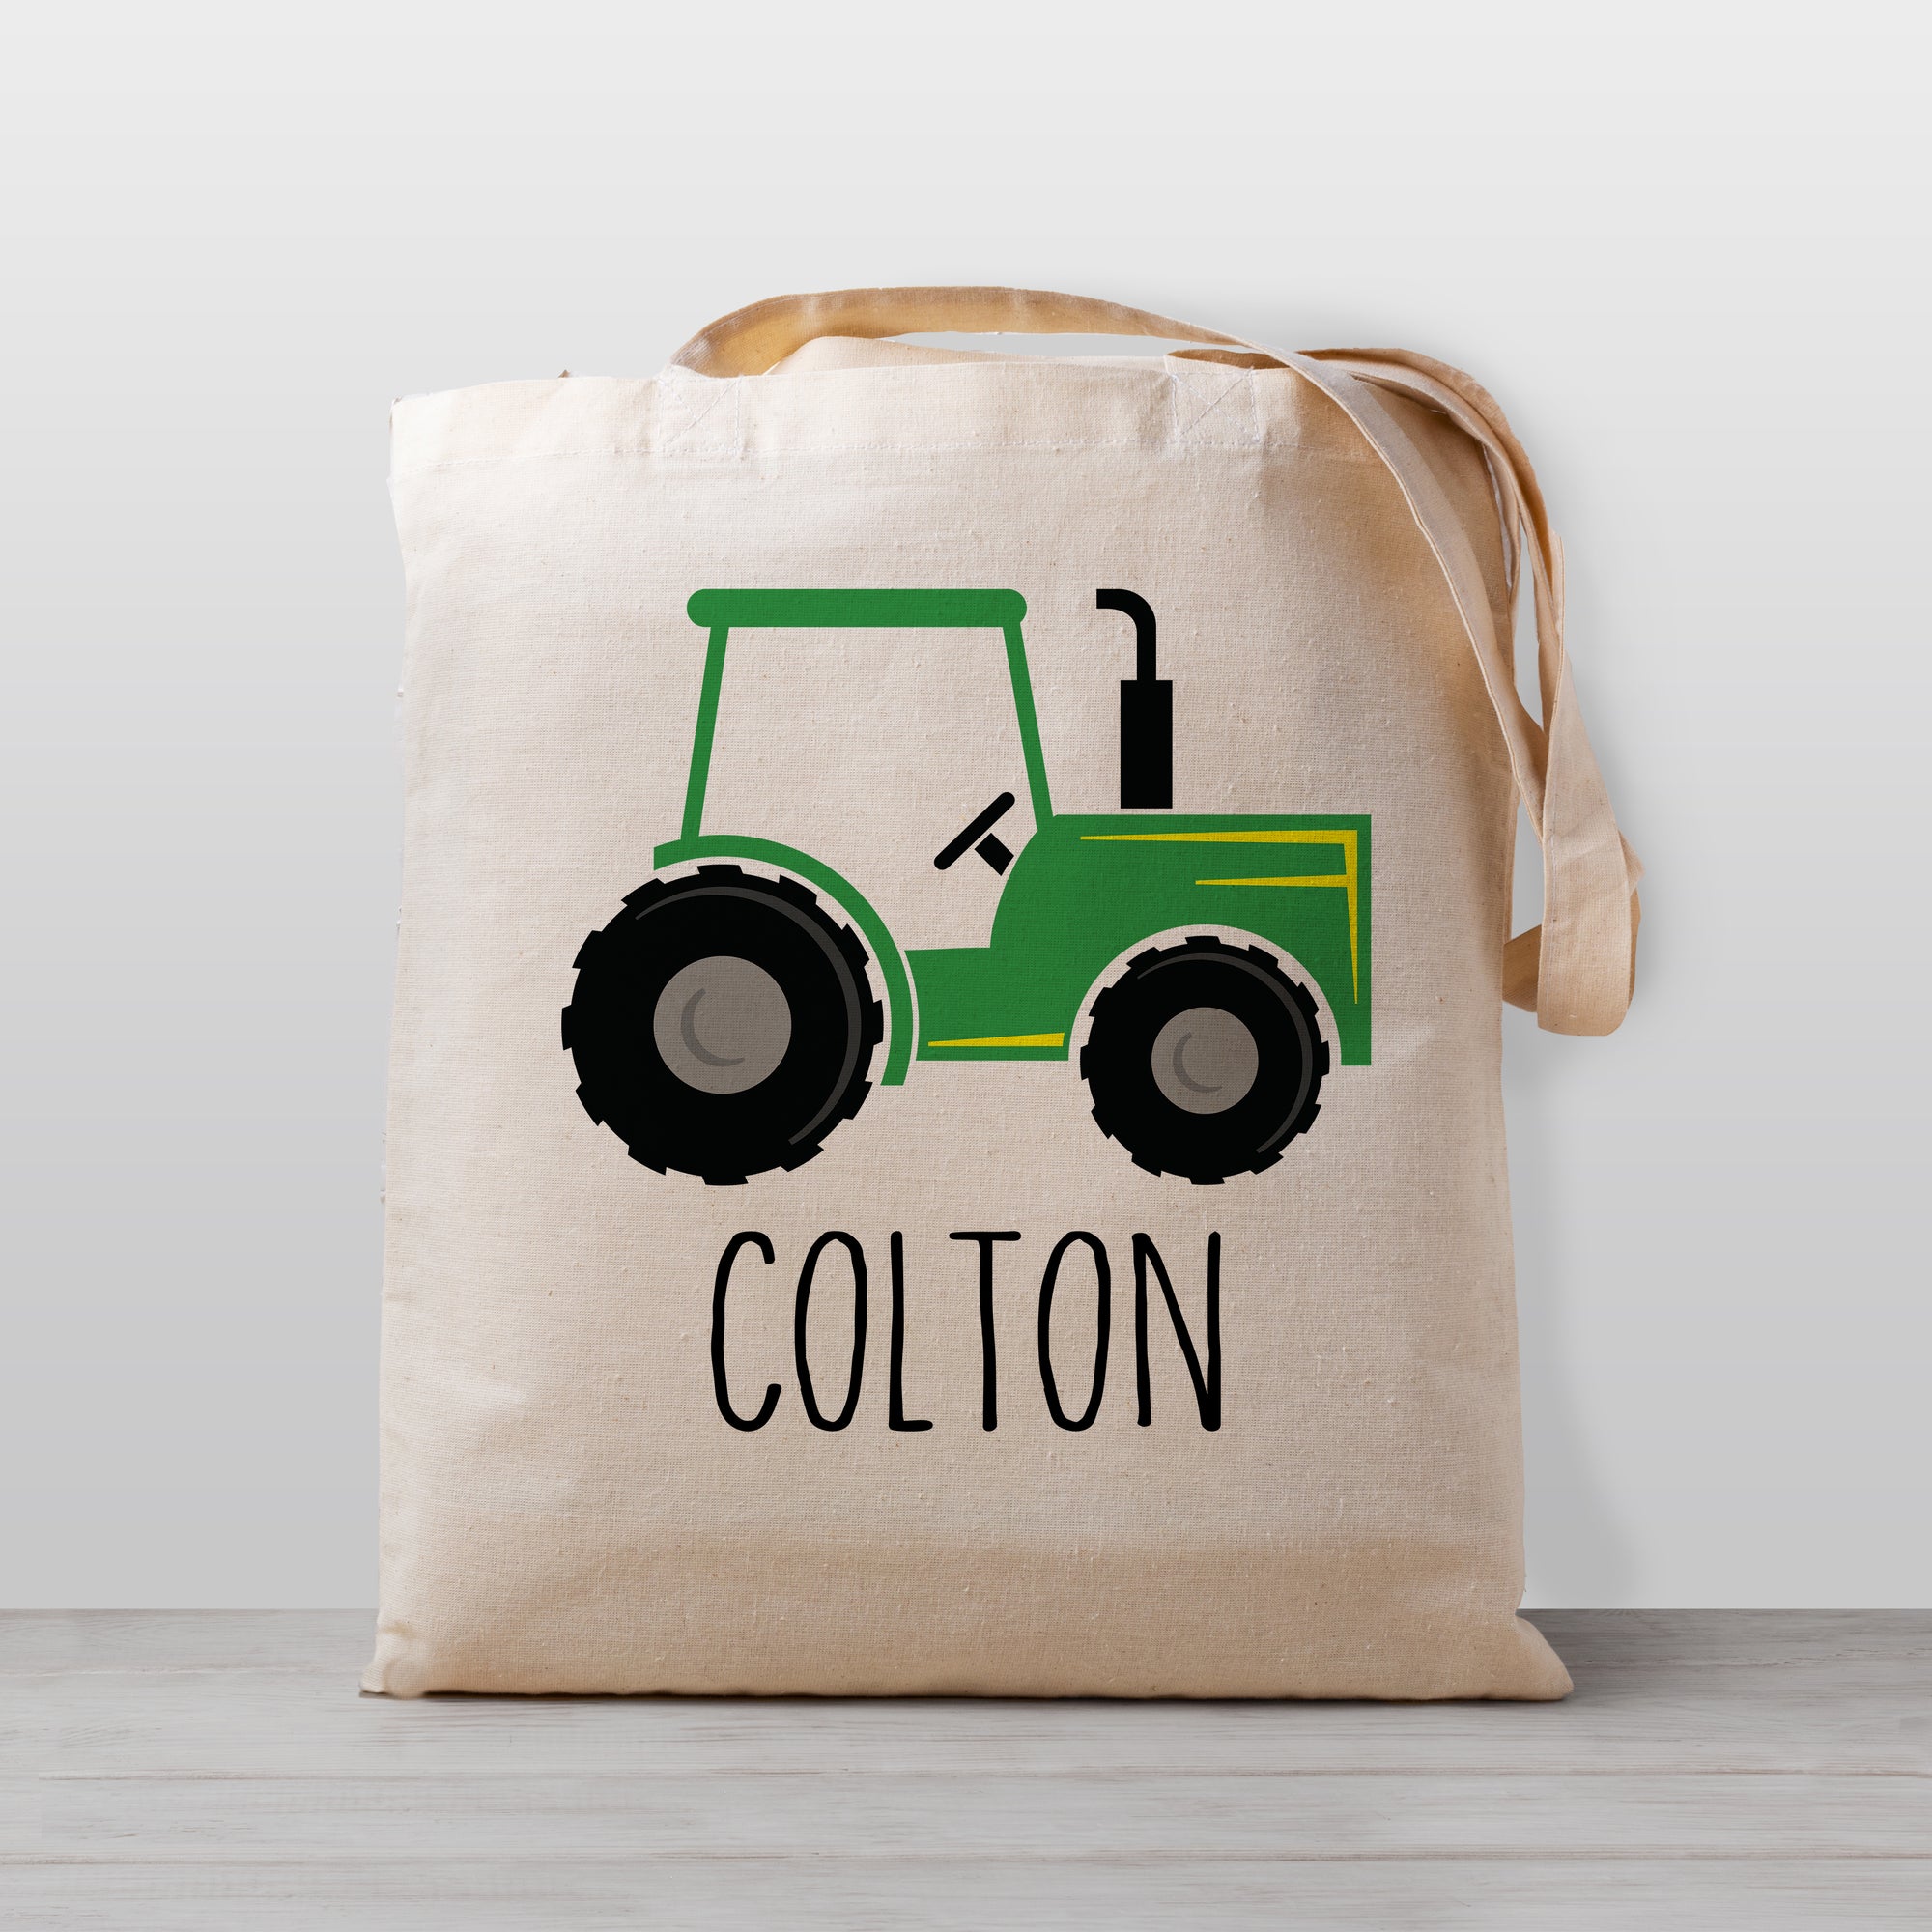 Green Farm Tractor Personalized Tote Bag from Pipsy.com, 100% Natural Cotton Canvas